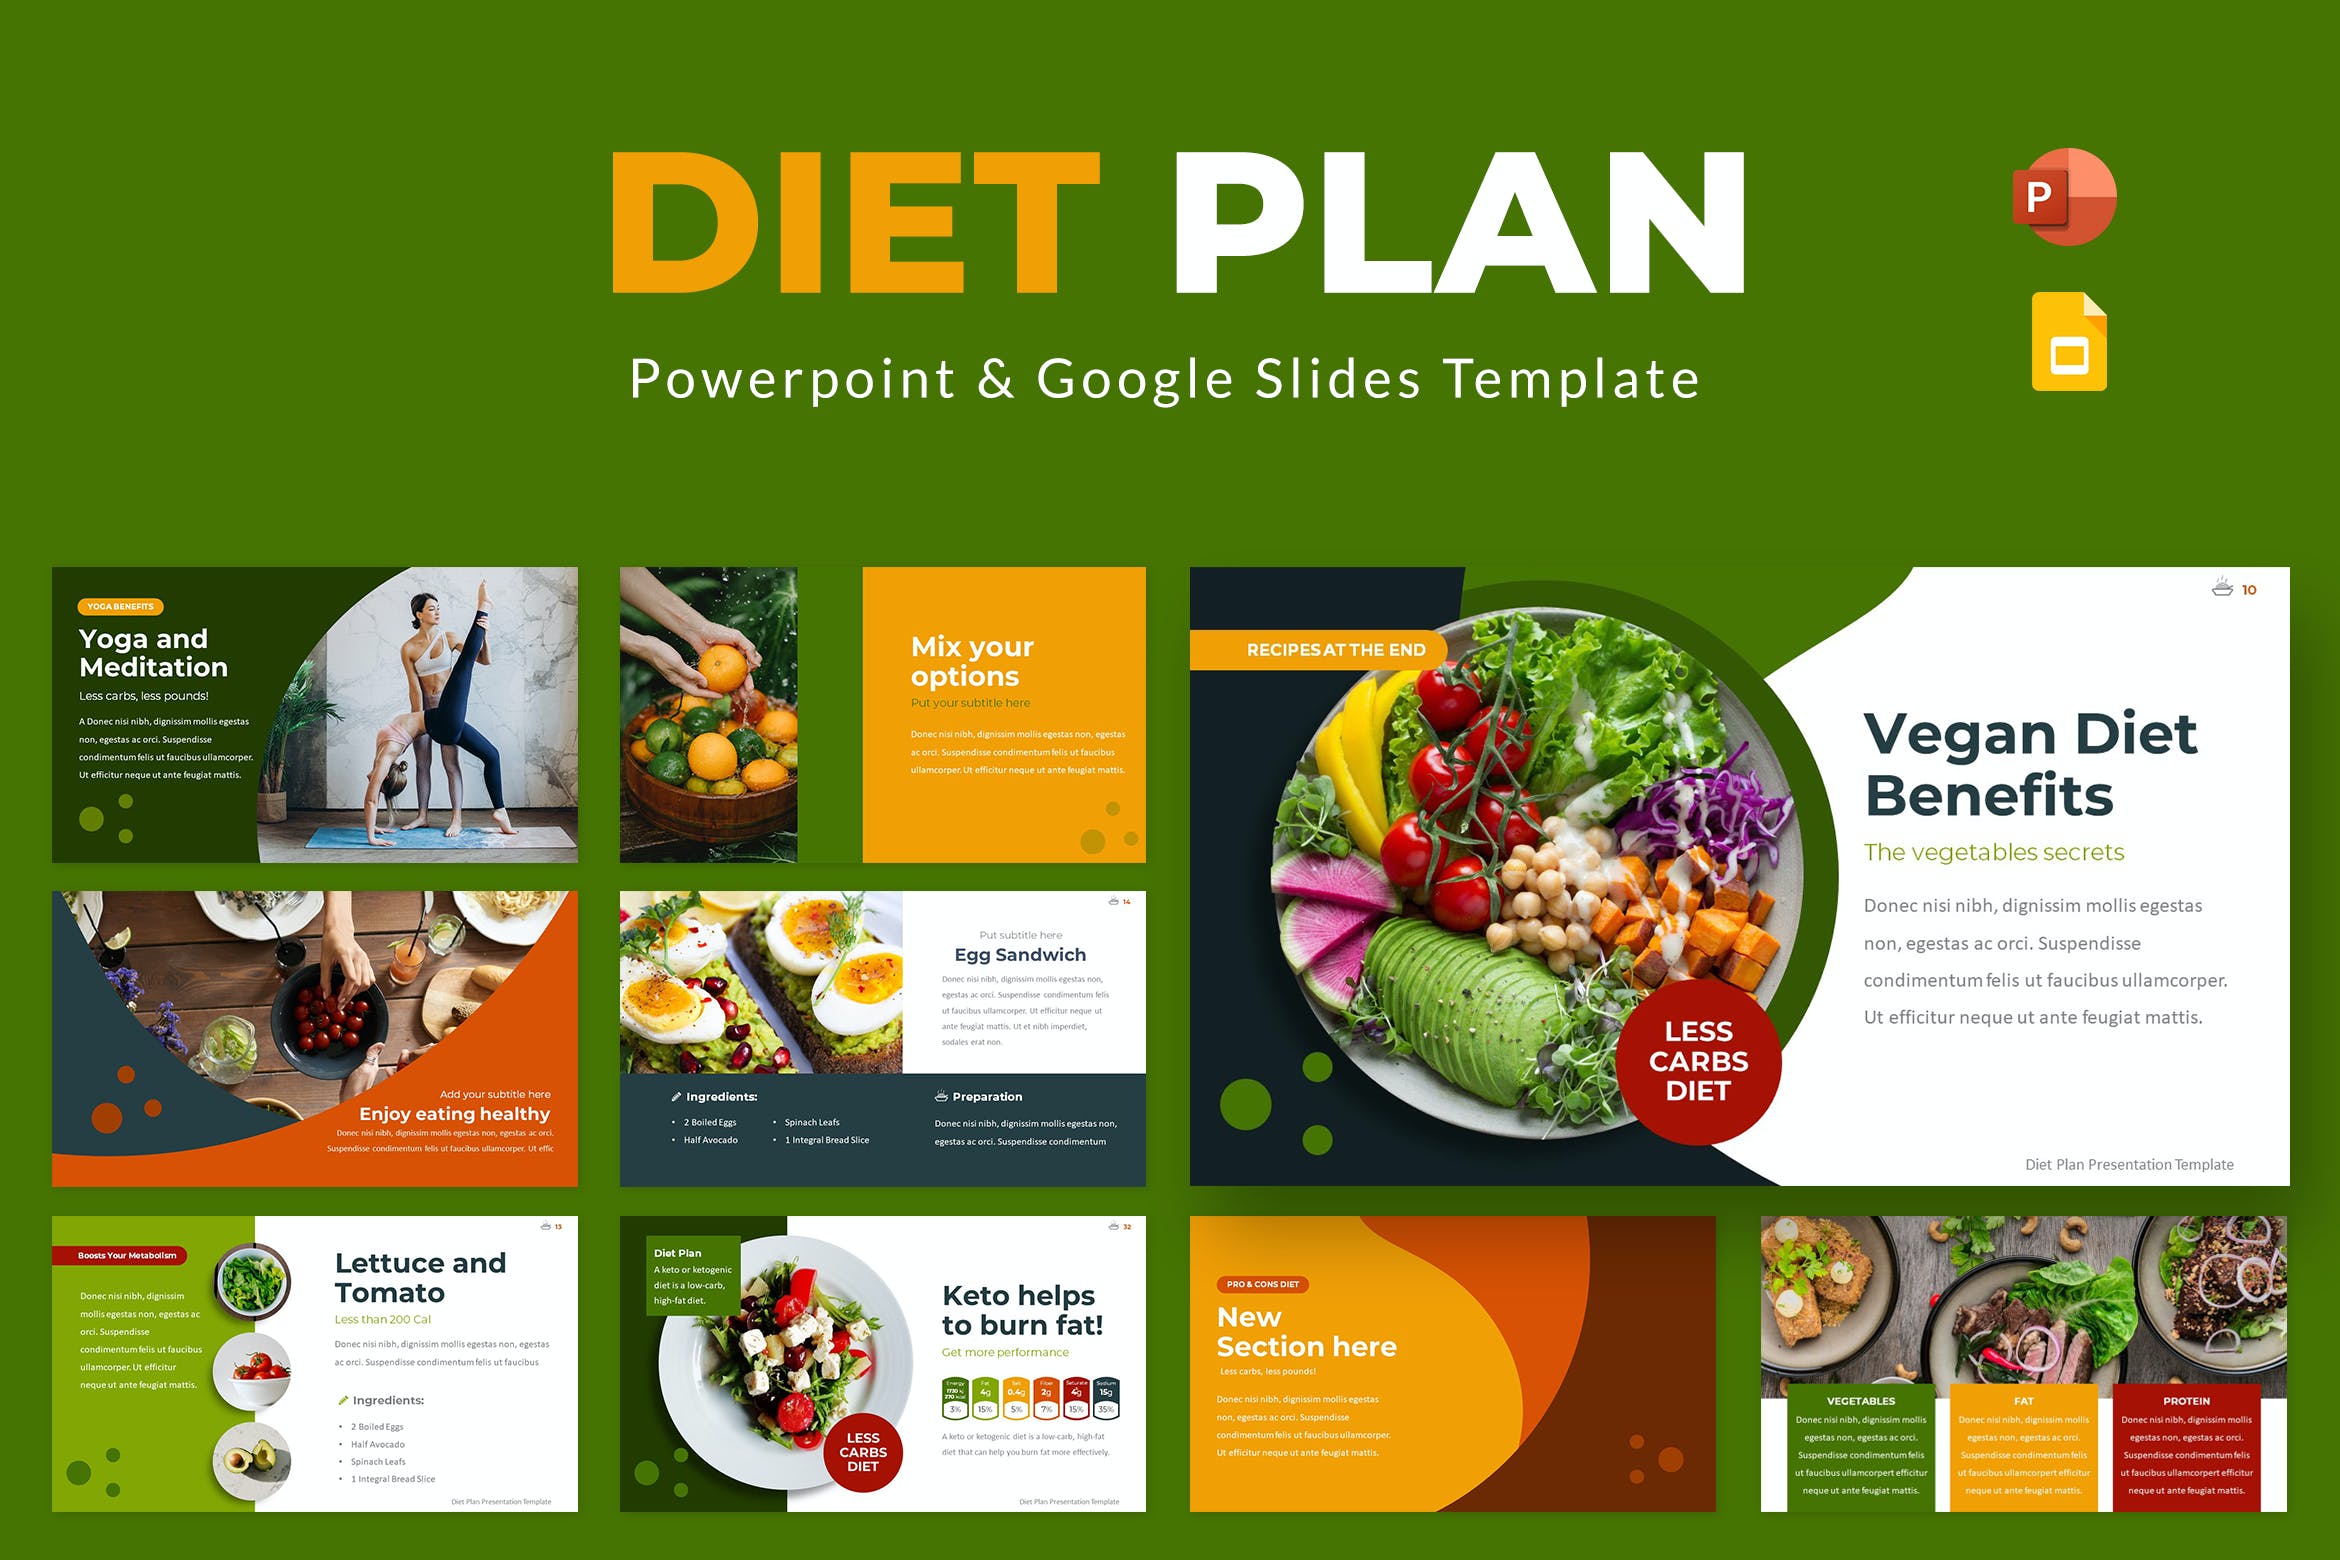 Cover image of Diet Plan Powerpoint & Google Slides Template.